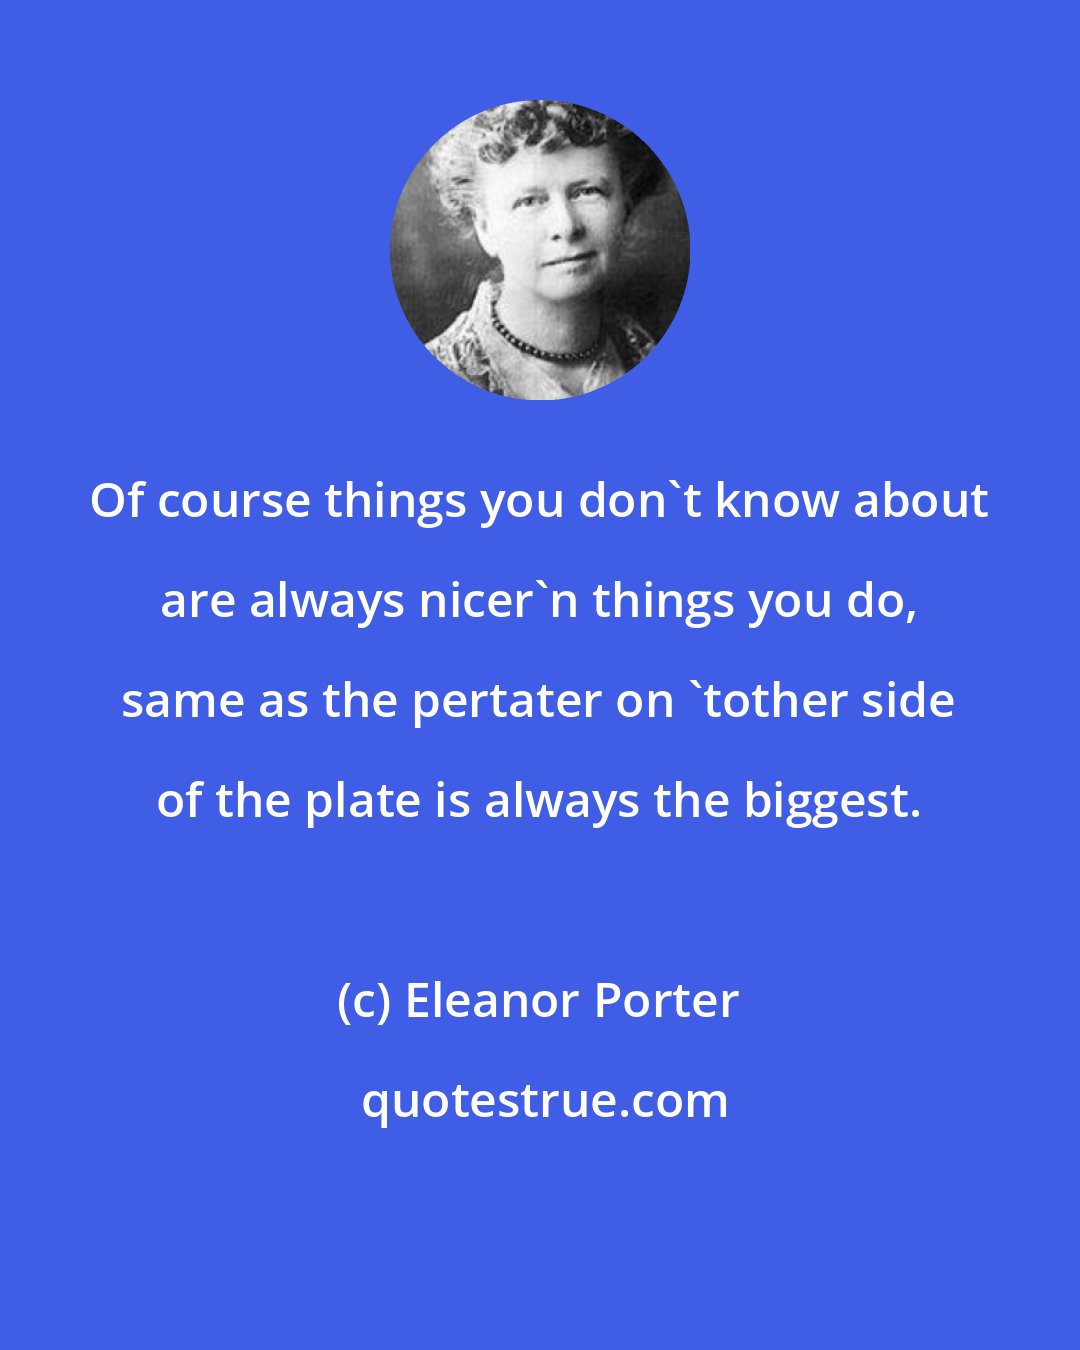 Eleanor Porter: Of course things you don't know about are always nicer'n things you do, same as the pertater on 'tother side of the plate is always the biggest.